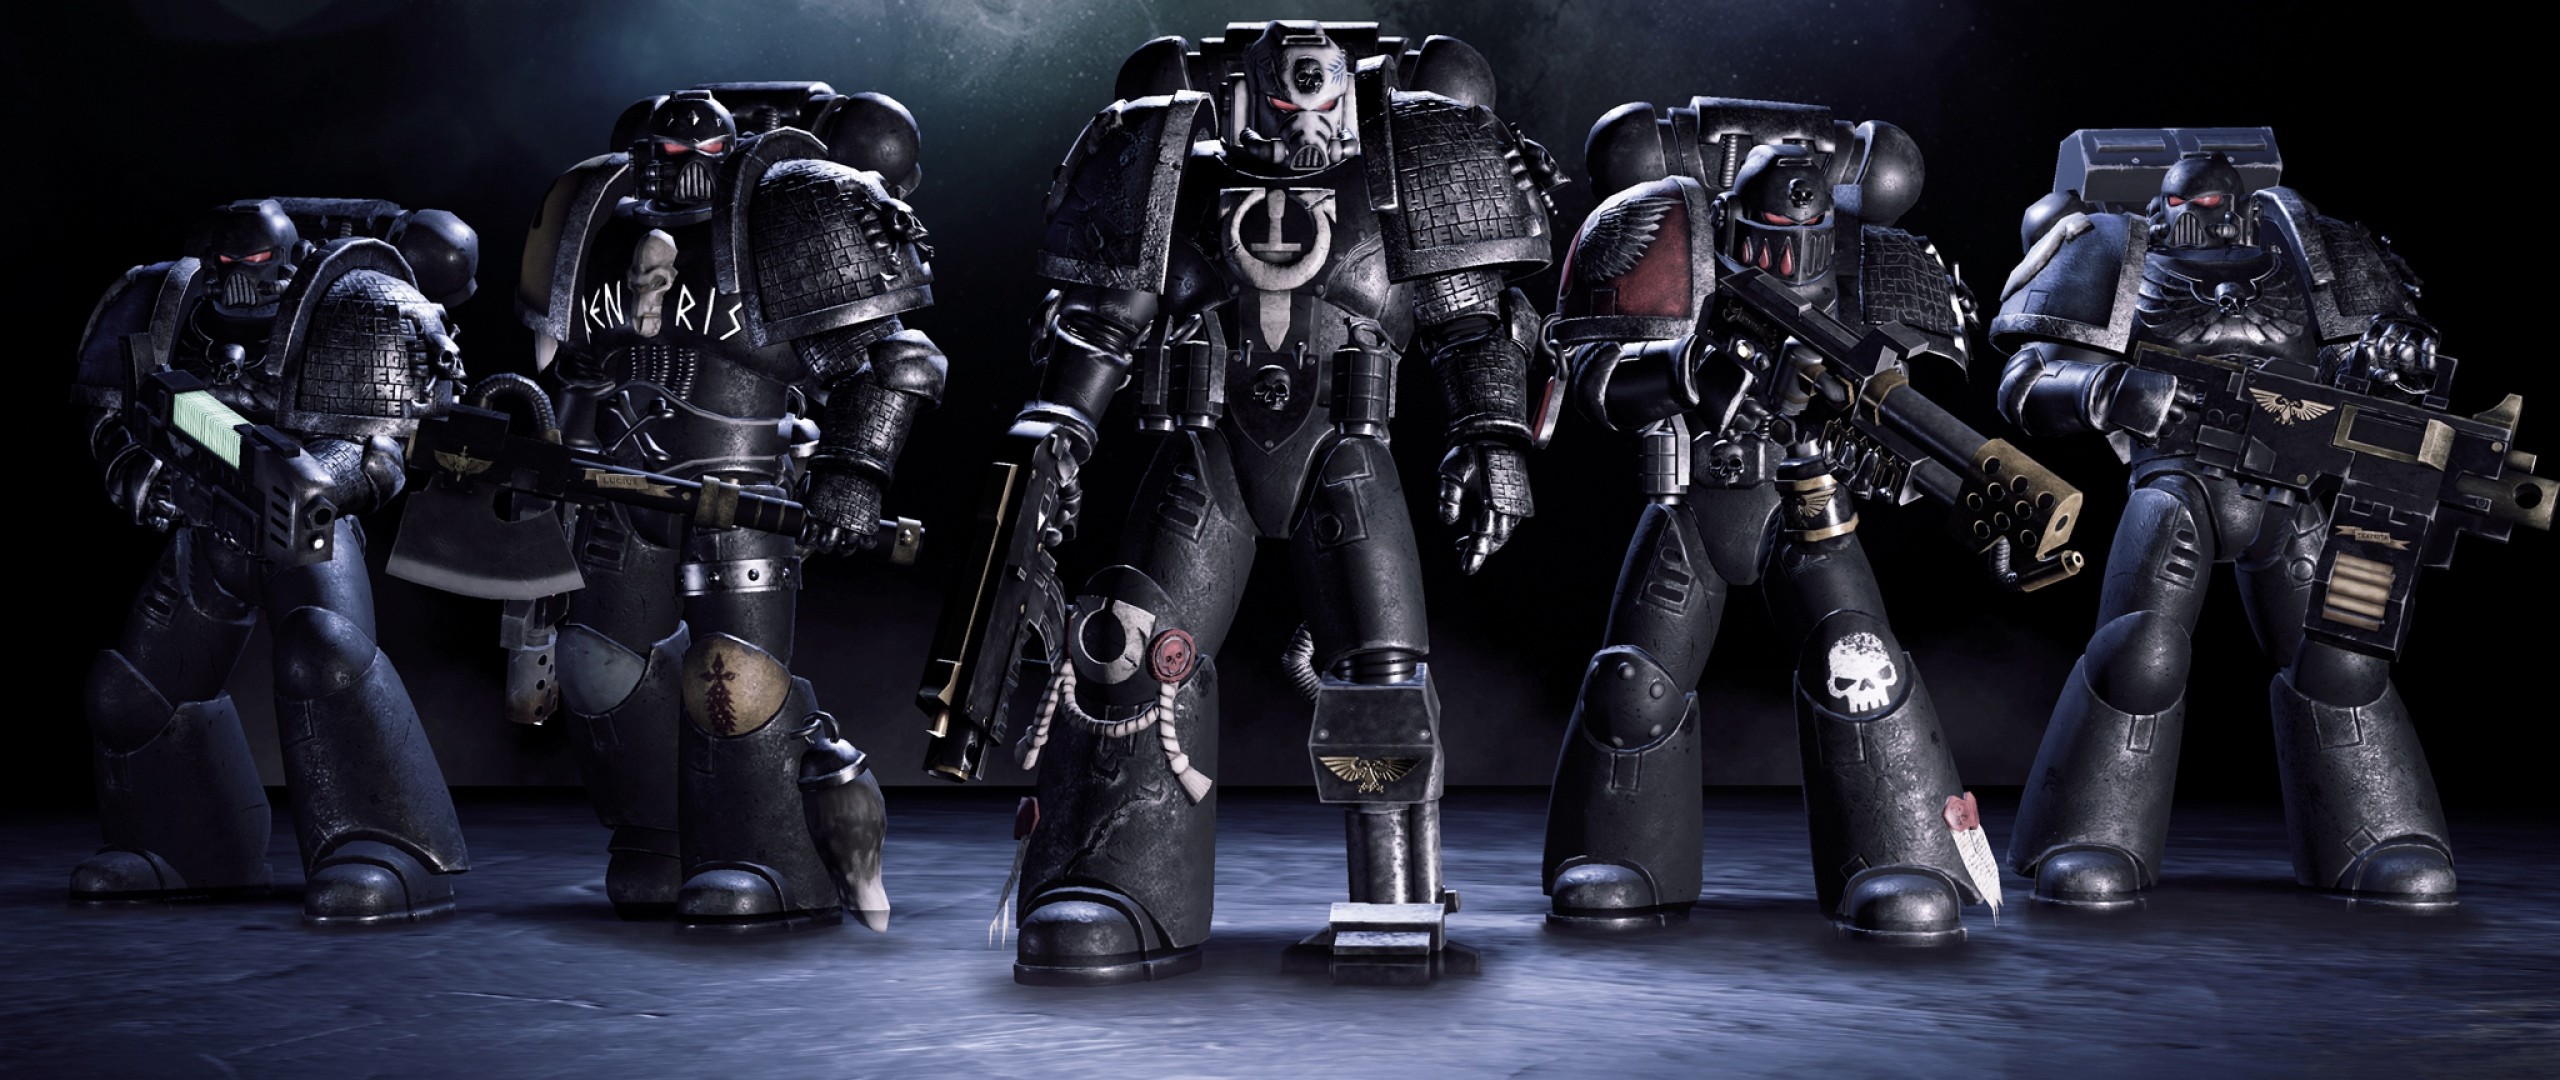 2560x1080 Preview wallpaper warhammer 40k, deathwatch, tyranid invasion, soldiers,  armor, weapons 